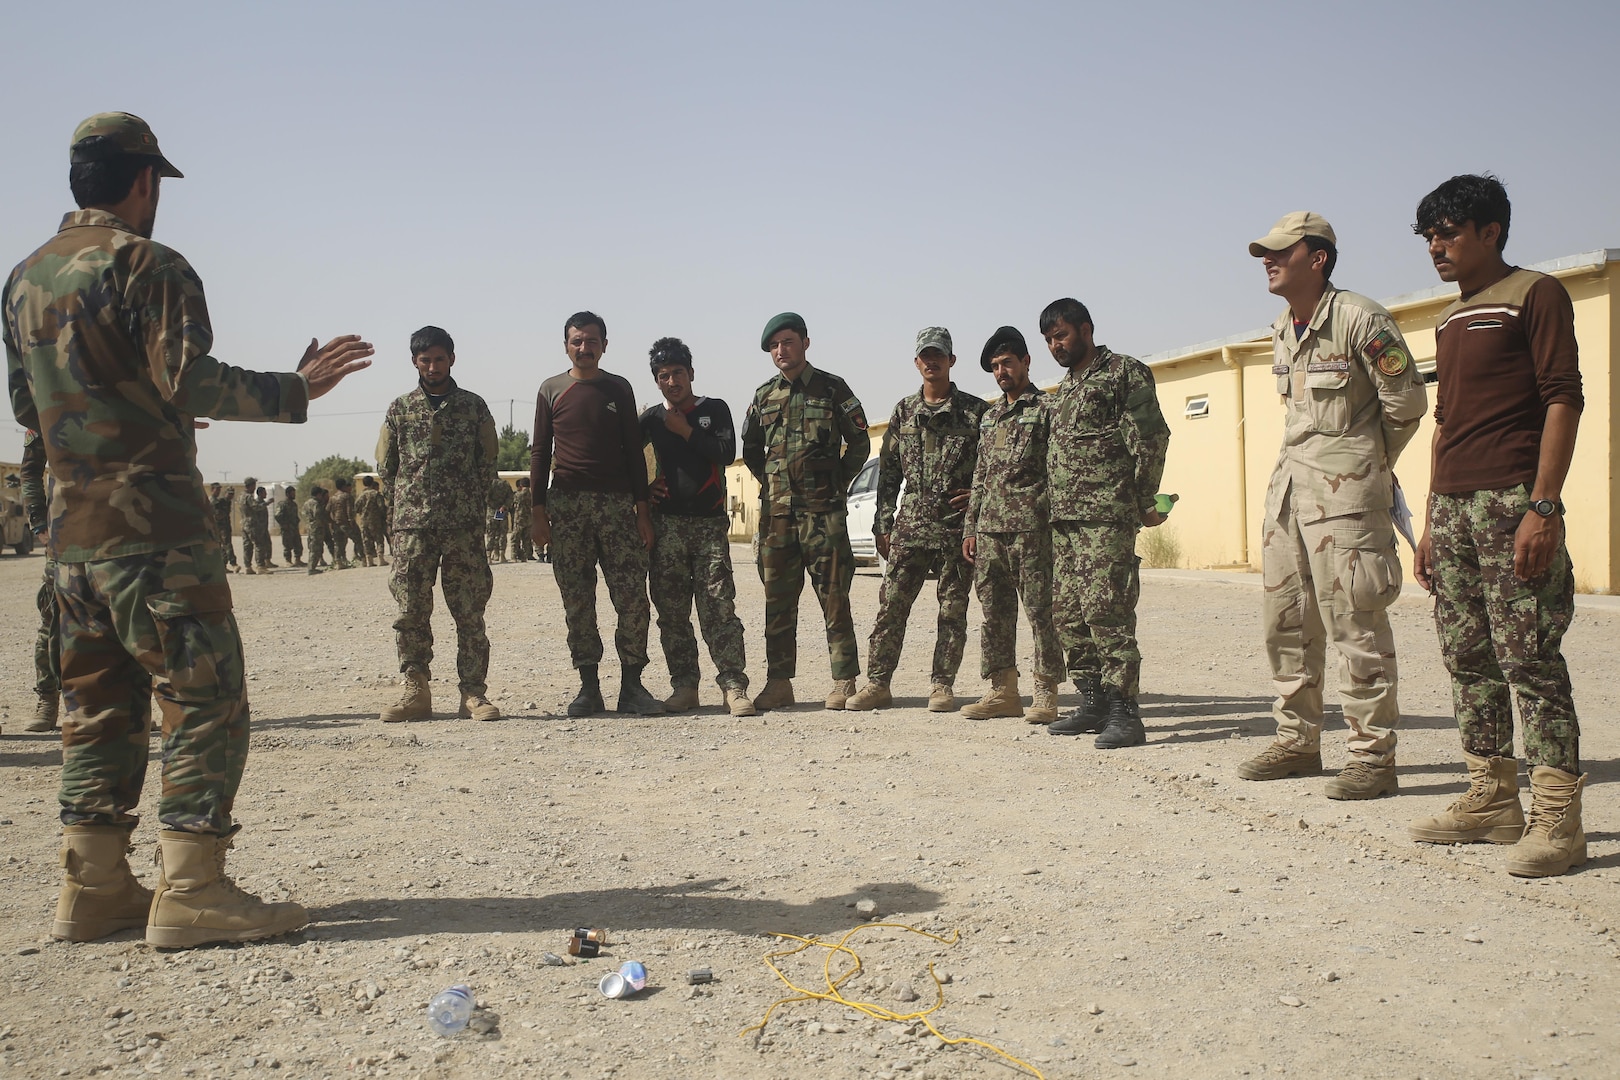 An Afghan National Army soldier with 215th Corps instructs his fellow soldiers on indicators of improvised explosive devices at Camp Shorabak, Afghanistan, July 13, 2017. Approximately 70 engineer soldiers with various units from the 215th Corps began a route clearance course July 8 with assistance from U.S. Marine advisors assigned to Task Force Southwest. The eight-week course is designed to bolster the soldiers’ route clearance capabilities to help promote maneuverability amongst infantry kandaks and supplies in Helmand Province. (U.S. Marine Corps photo by Sgt. Lucas Hopkins)